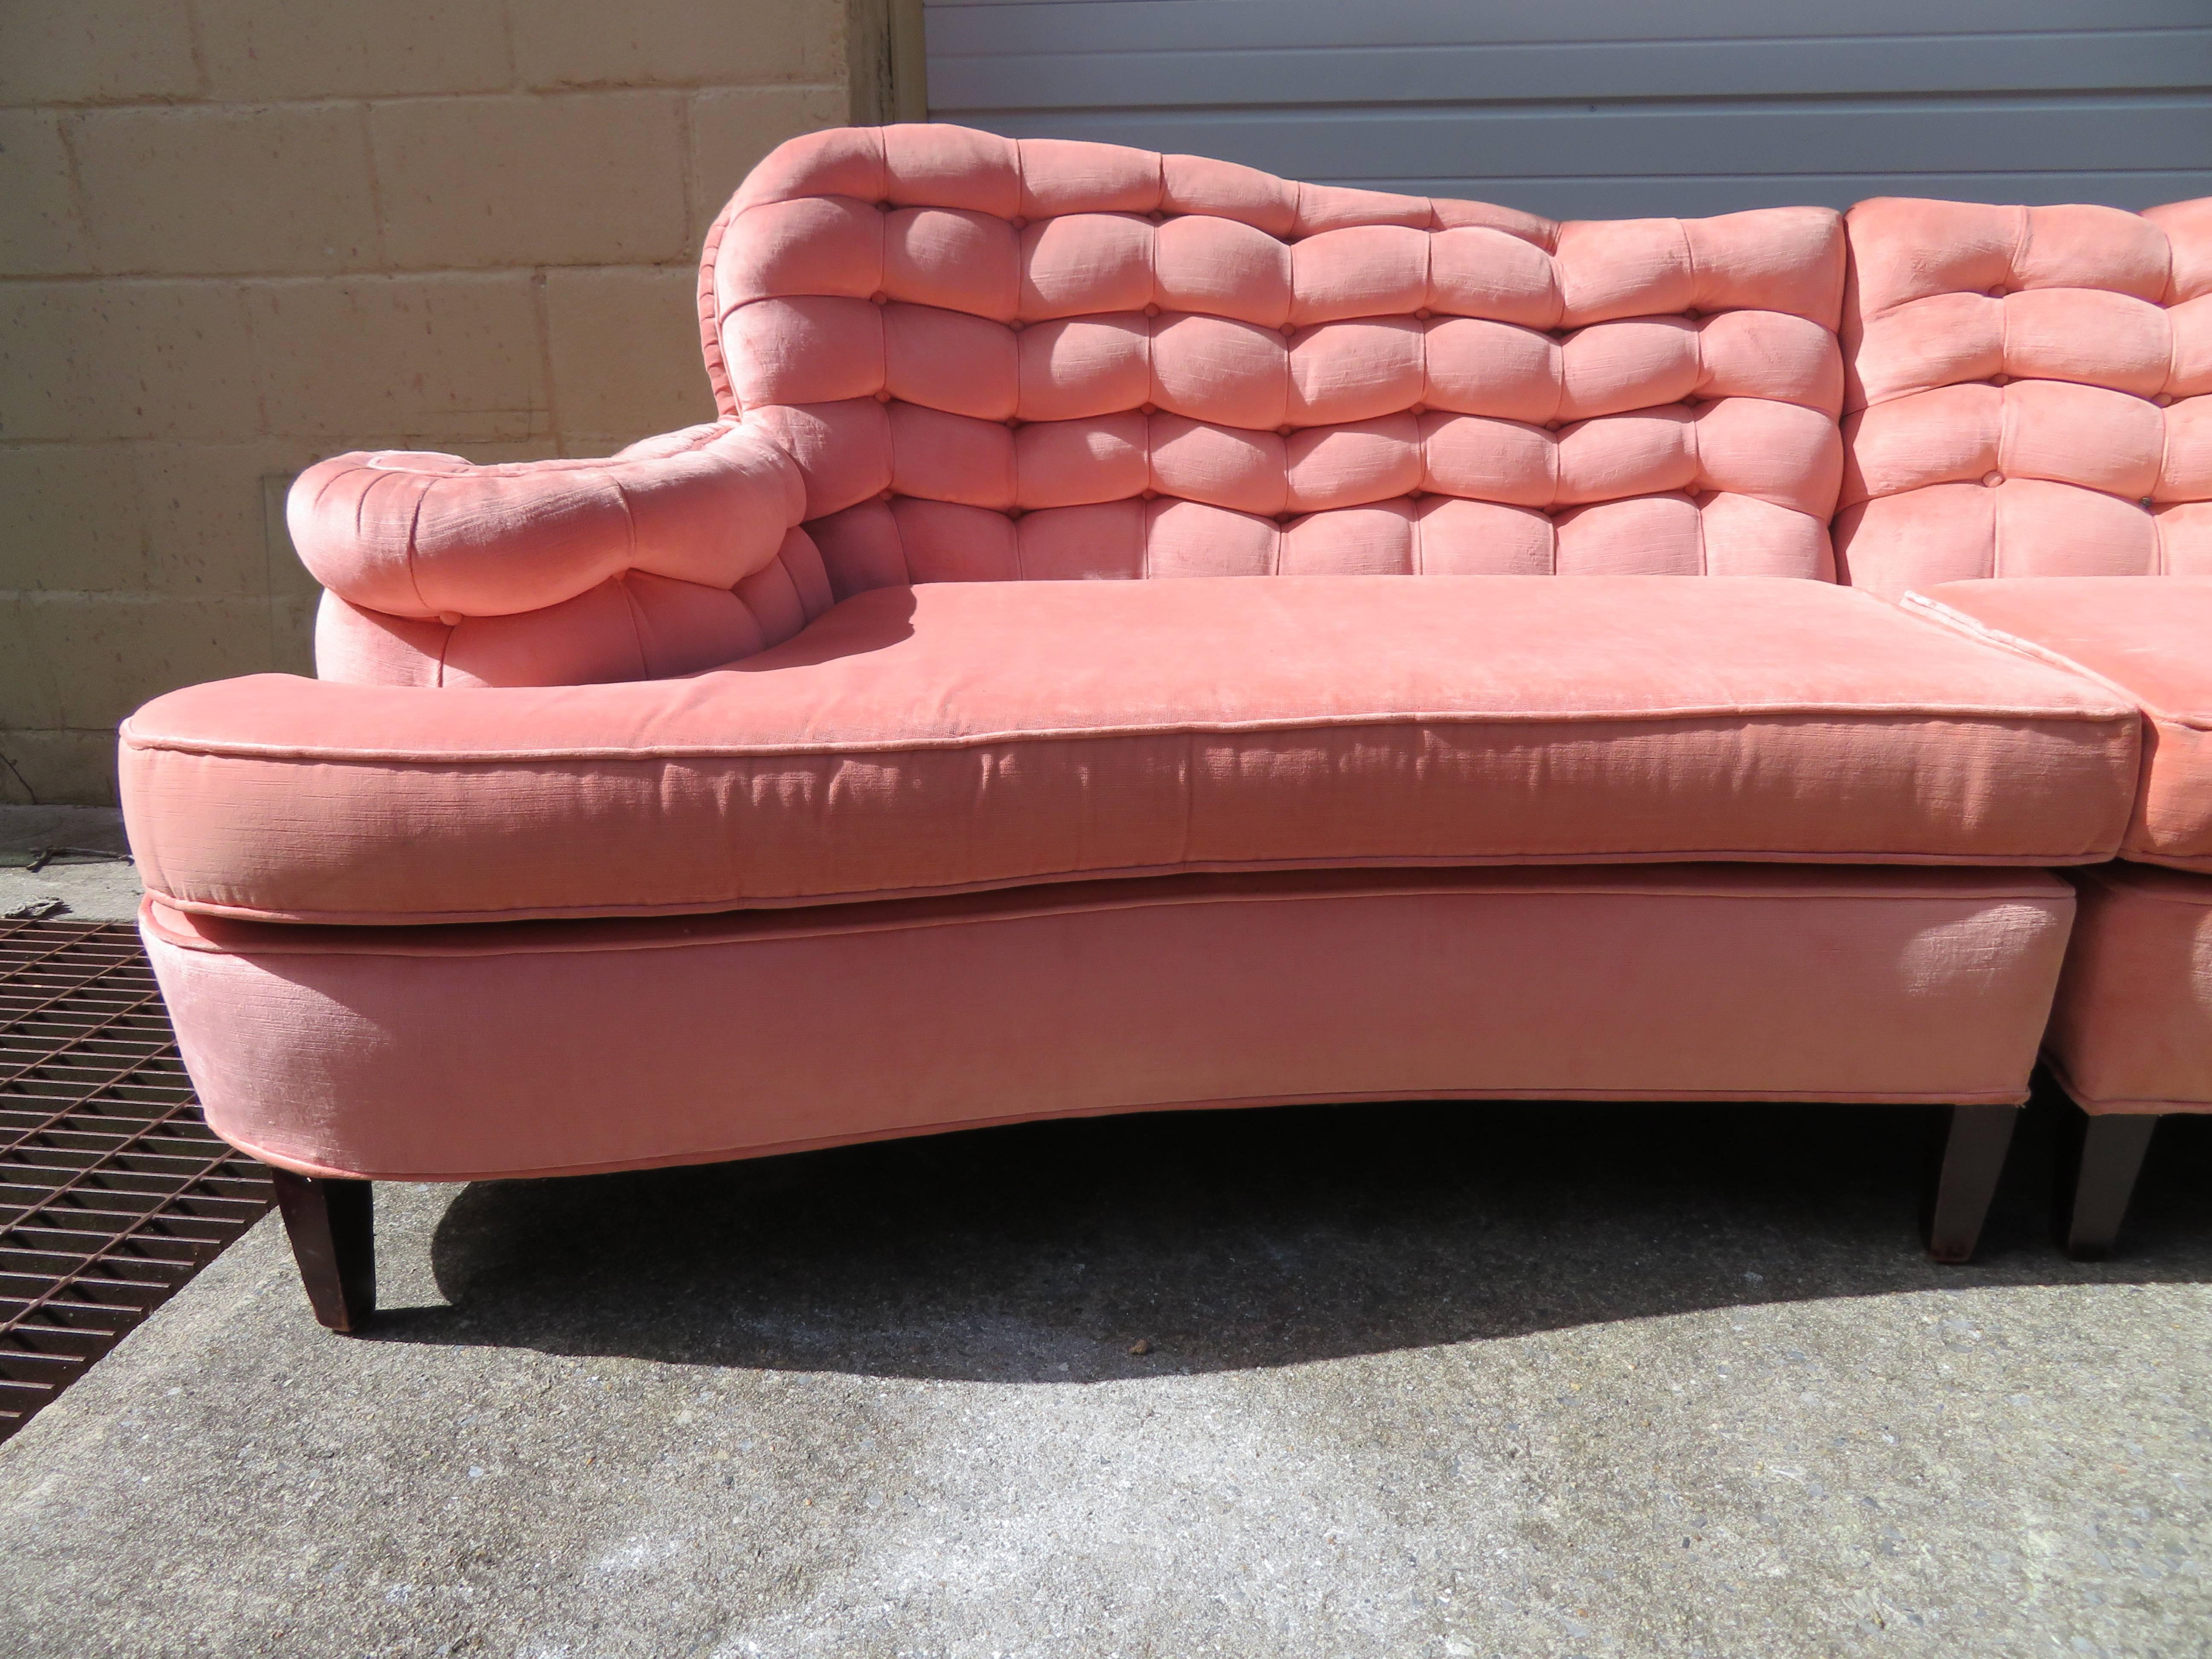 Truly stunning Dorothy Draper attributed scrolled arm curved two-piece biscuit tufted back sofa. This is one of those pieces that actually makes your heart skip a beat when you see it. The original pink velvet fabric still looks lovely-just some